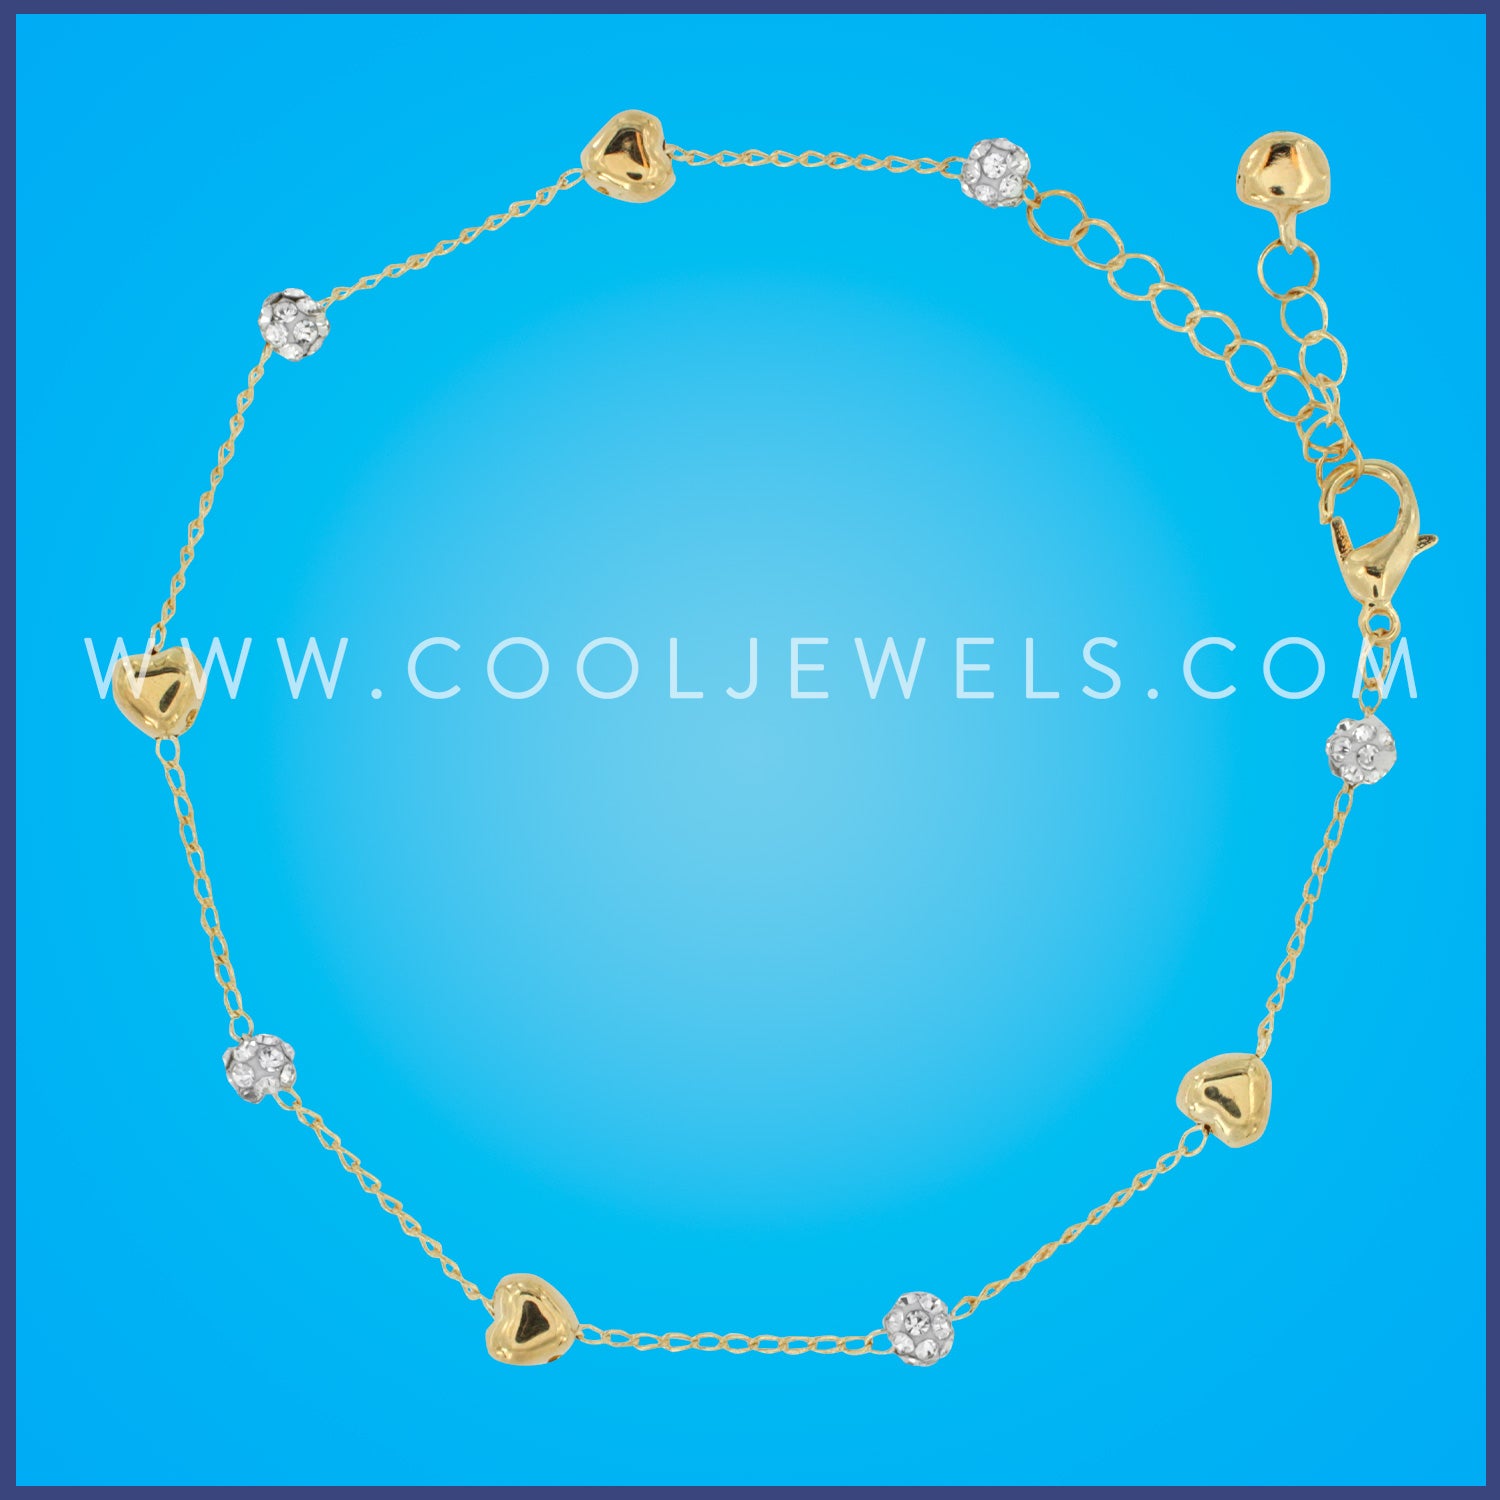 GOLD CHAIN ANKLET WITH RHINESTONE & GOLD HEART BEADS - ASSORTED